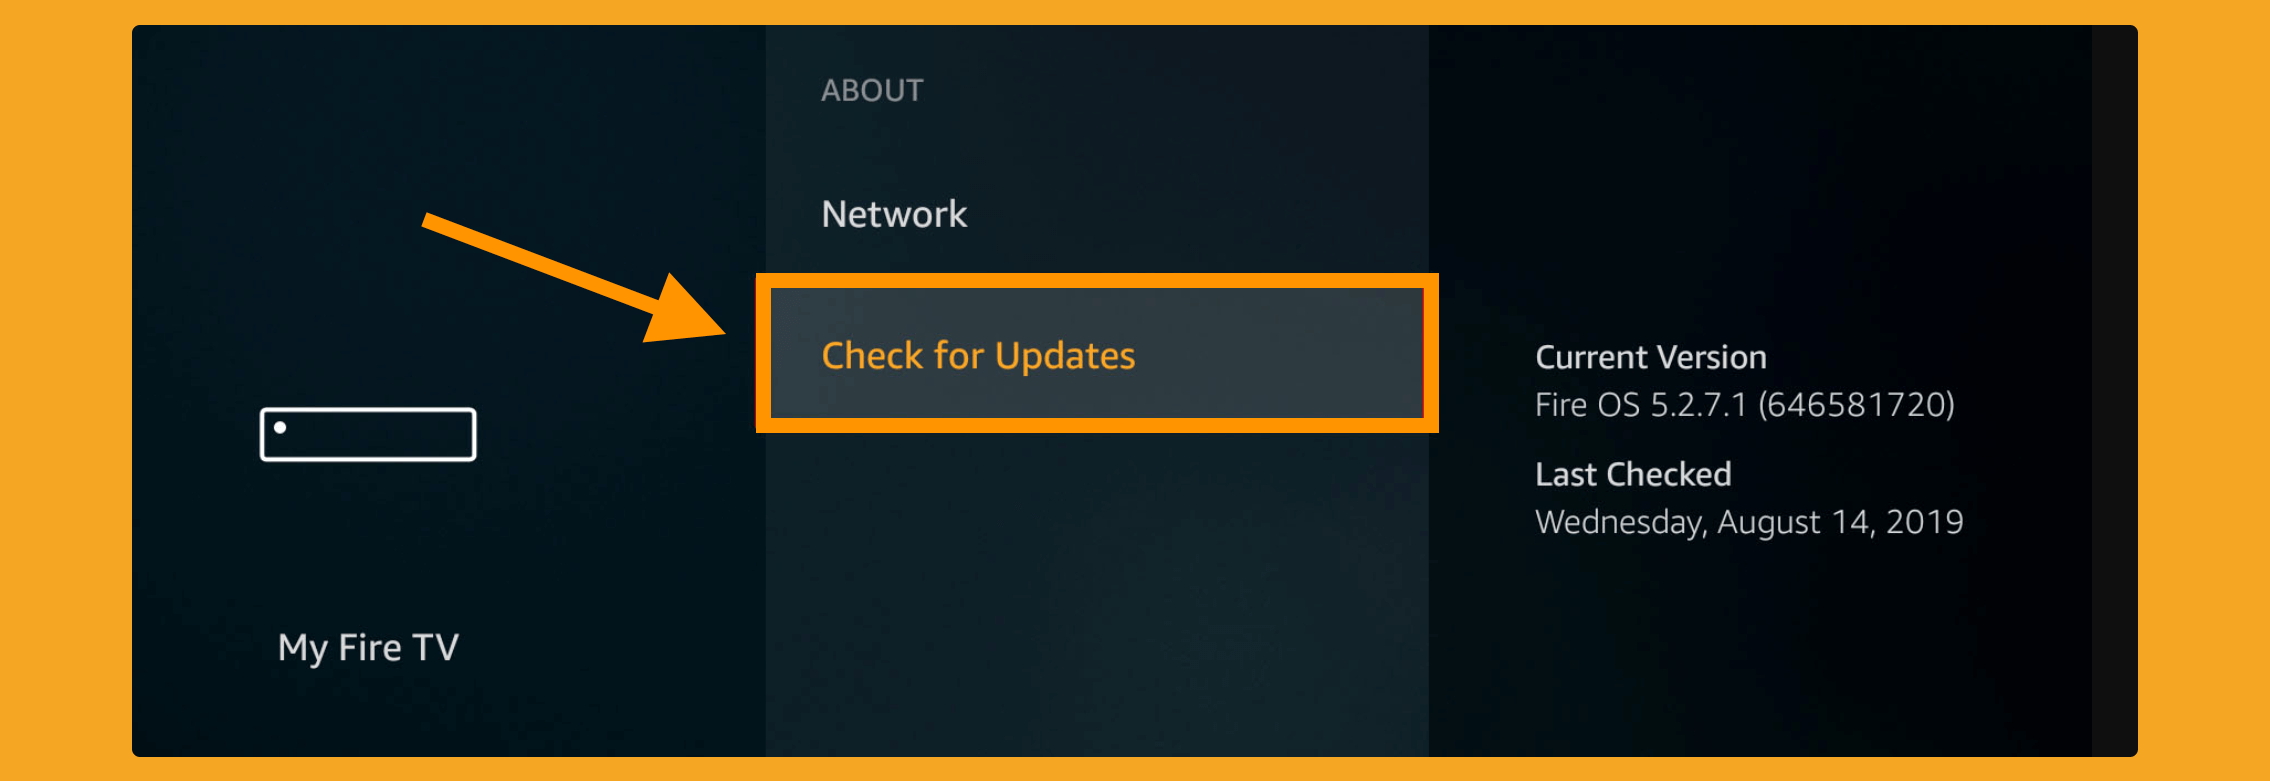 Check-for-updates-to-Fix-Firestick-Keeps-Rebooting